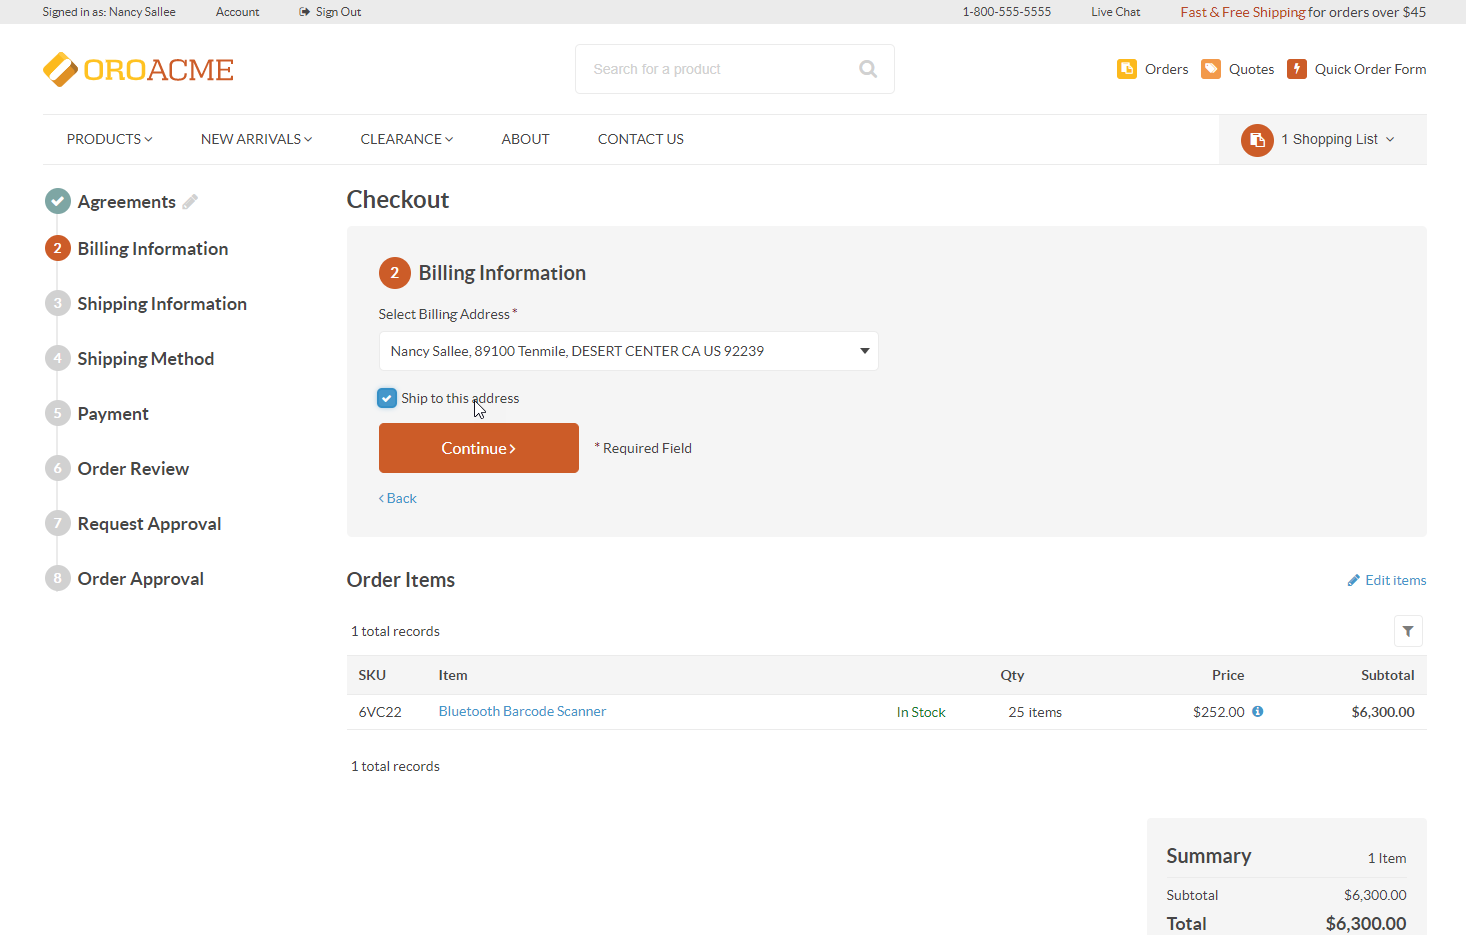 An example of a multi-page checkout